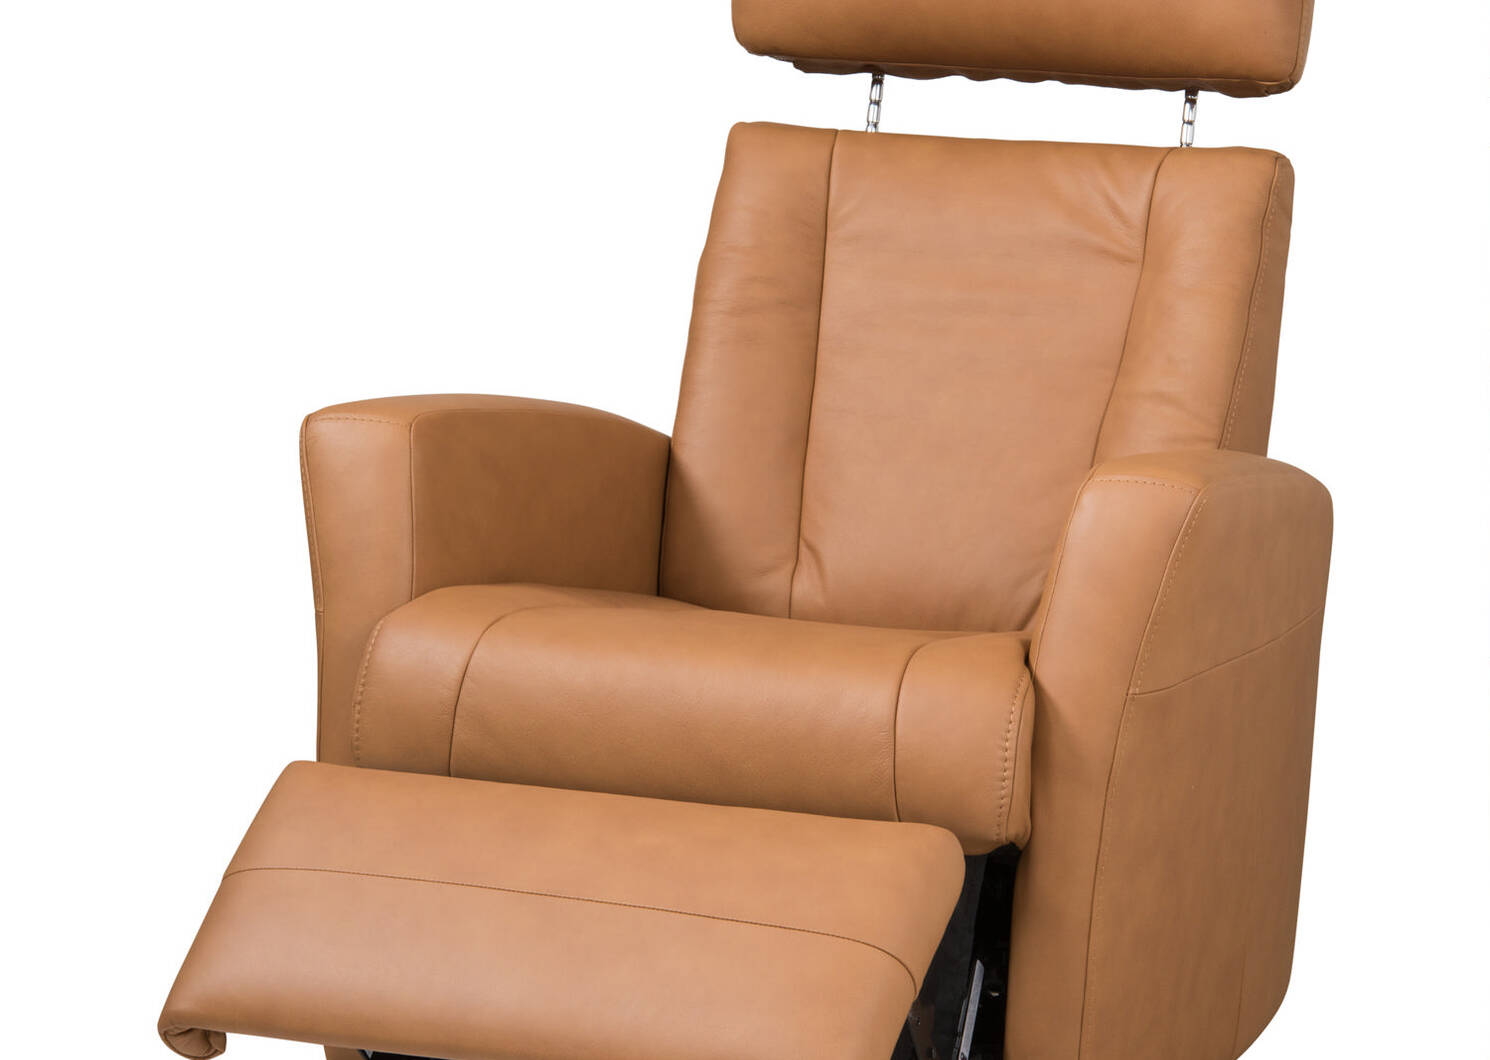 Belvedere Leather Recliner Tre Tan, Tan Leather Recliner